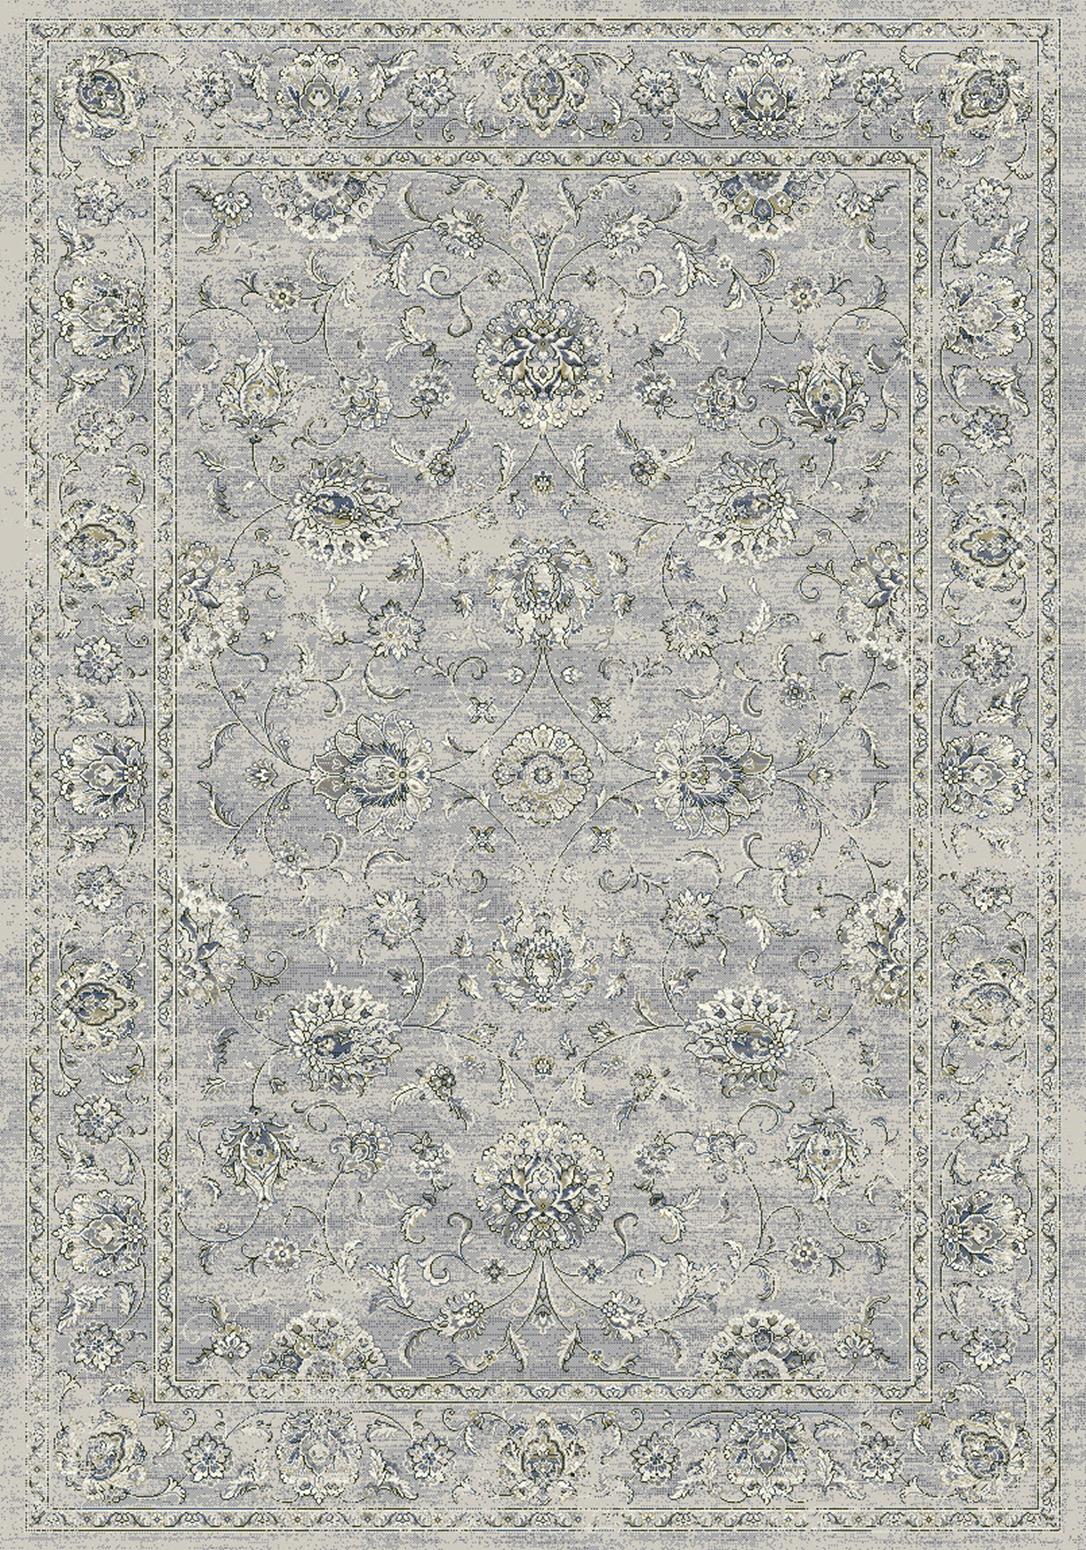 Ancient Garden 57126-9696 Silver/Grey Area Rug by Dynamic Rugs